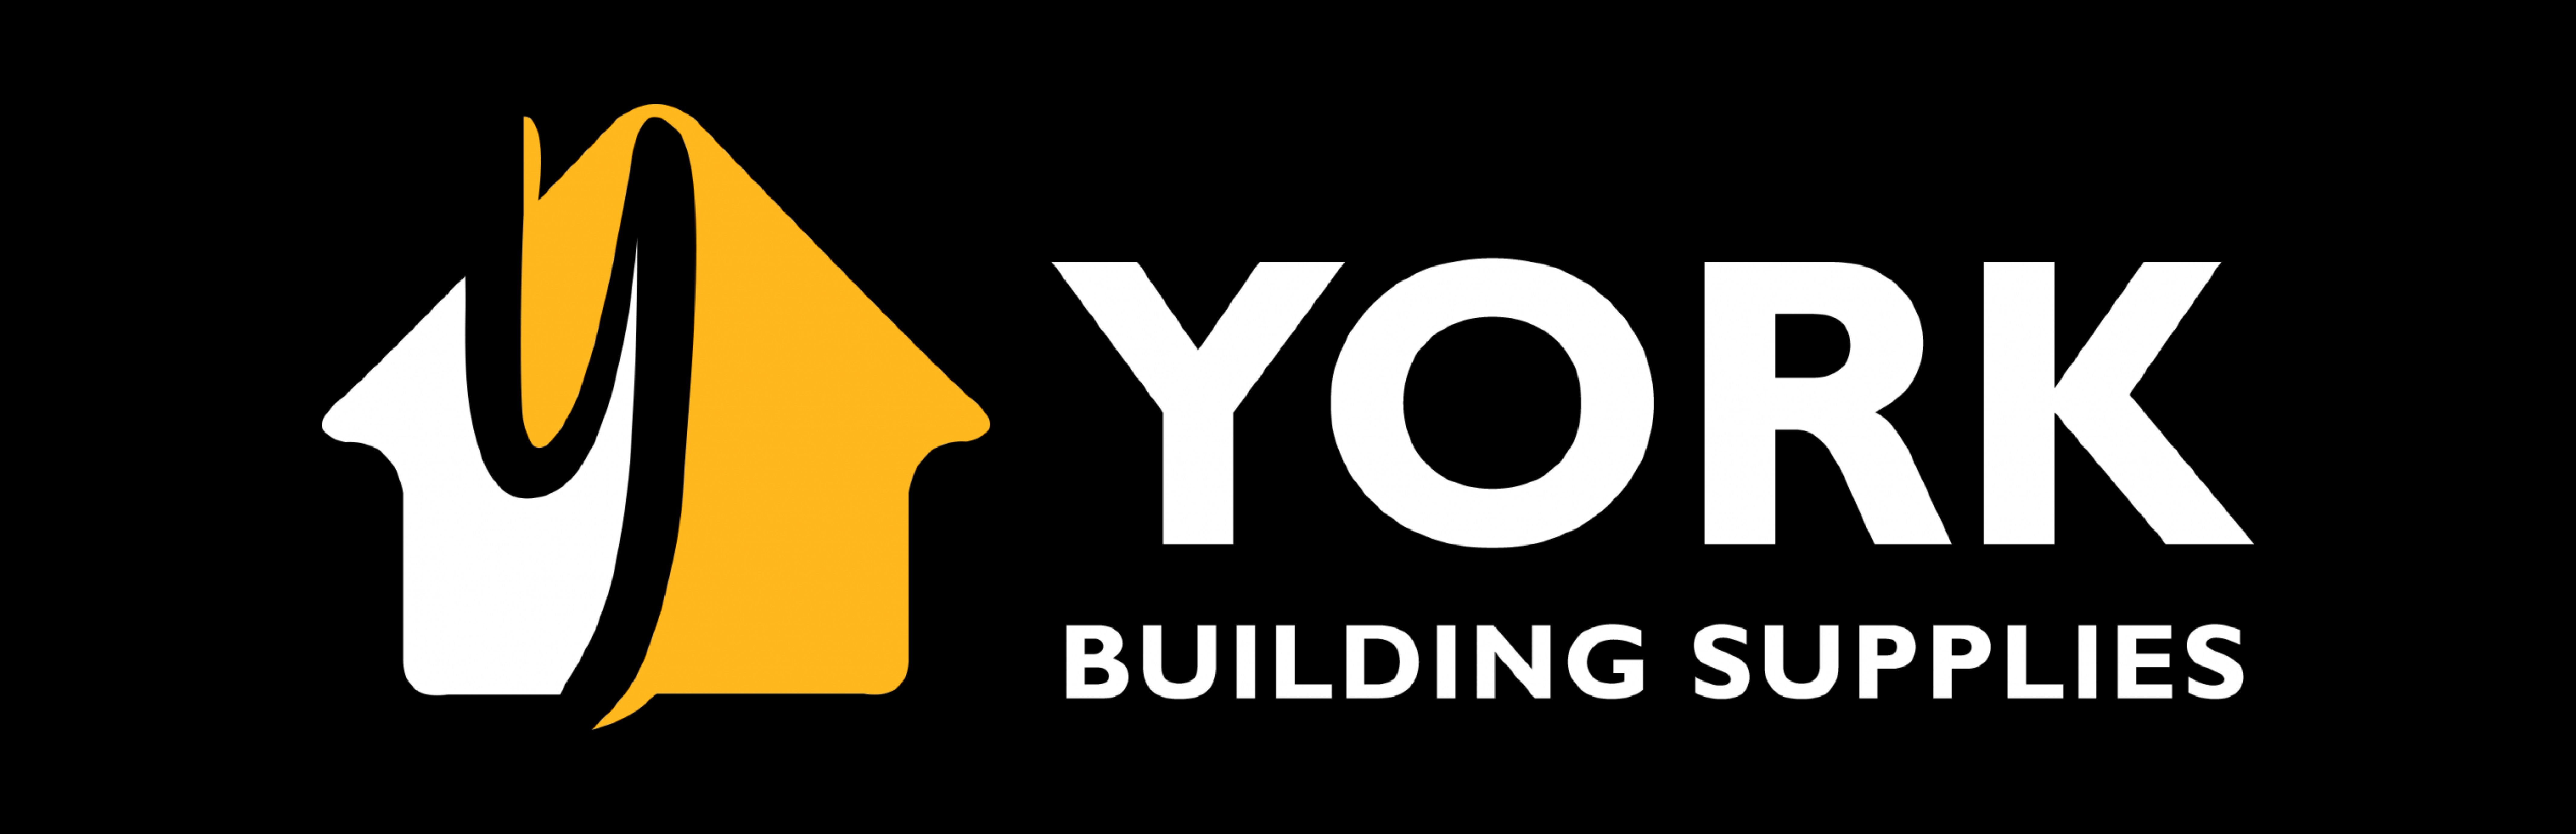 York Building Supplies Advices Tips While Buying Building Materials for Your Home